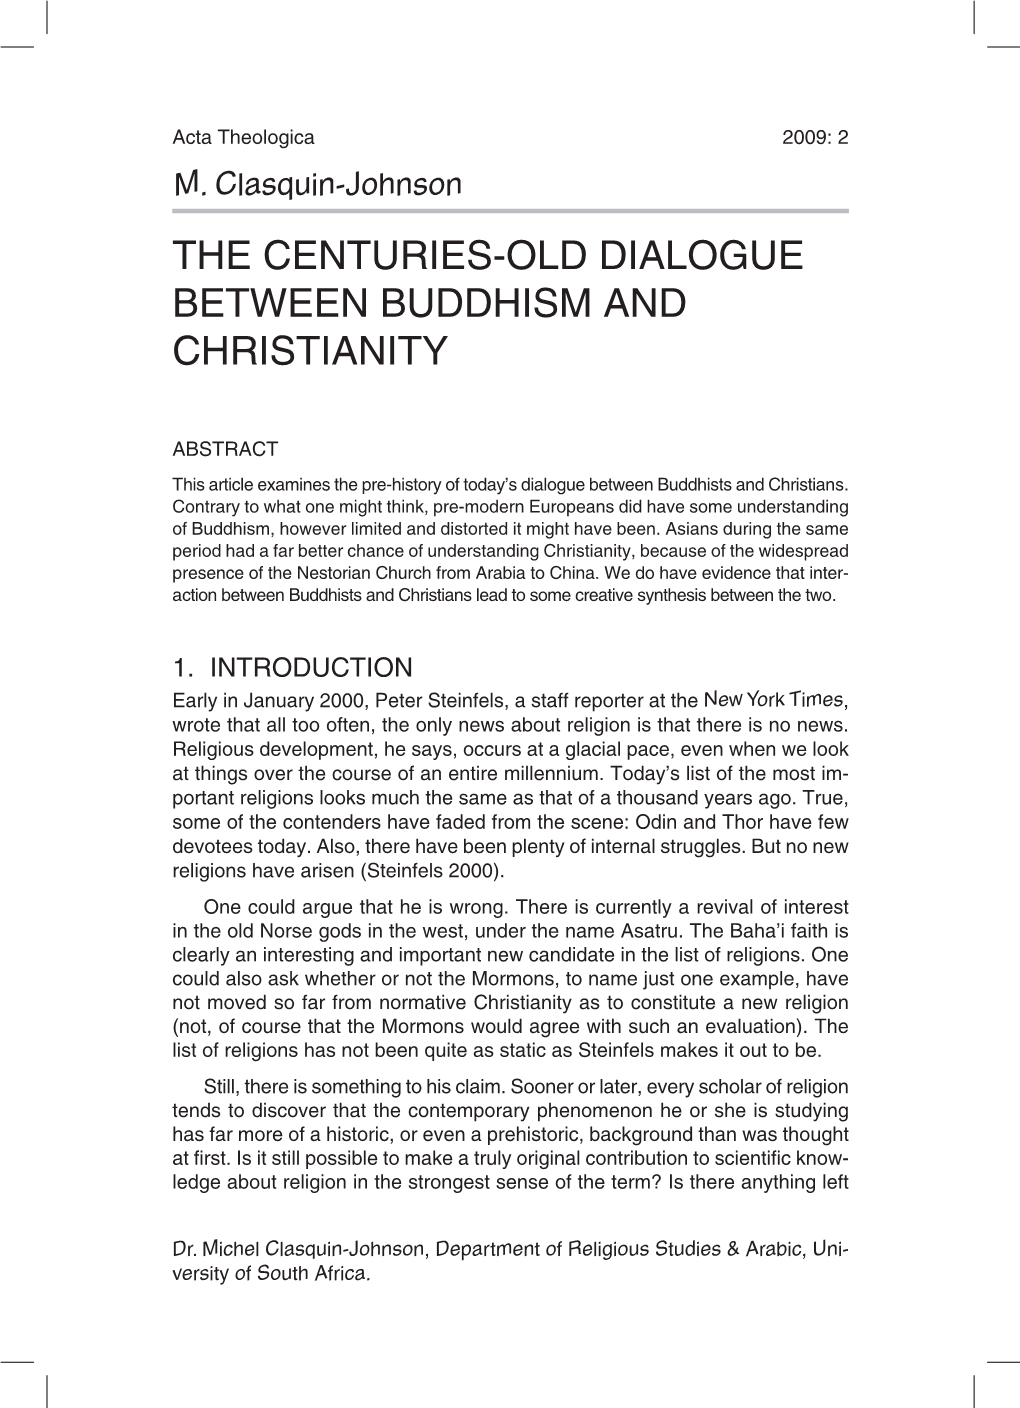 The Centuries-Old Dialogue Between Buddhism and Christianity